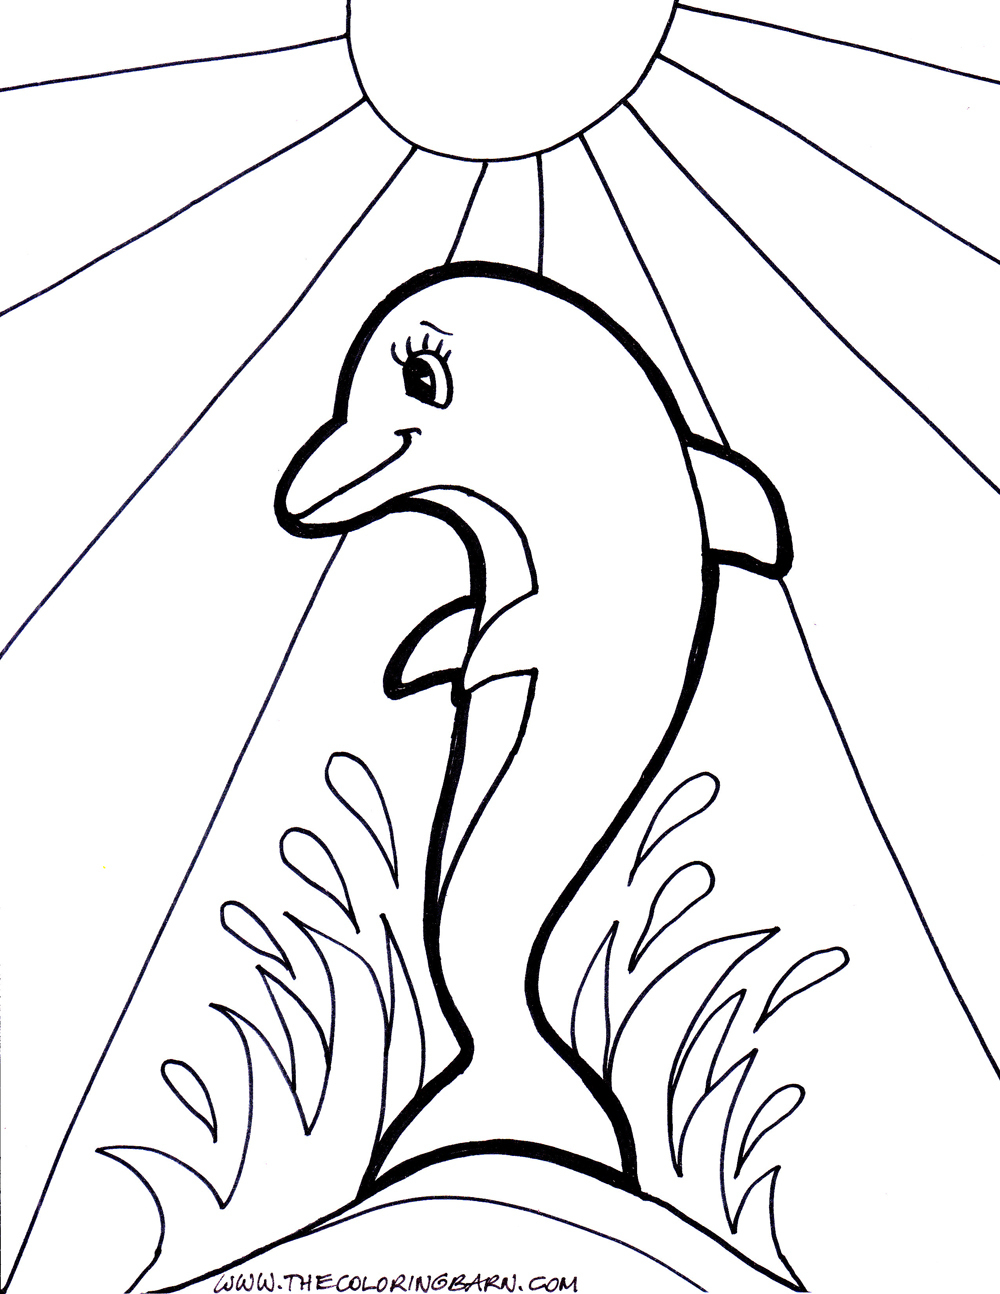 Coloring Pages : Dolphin Coloring Pages To Print Out Teenage Of Baby - Dolphin Coloring Sheets Free Printable